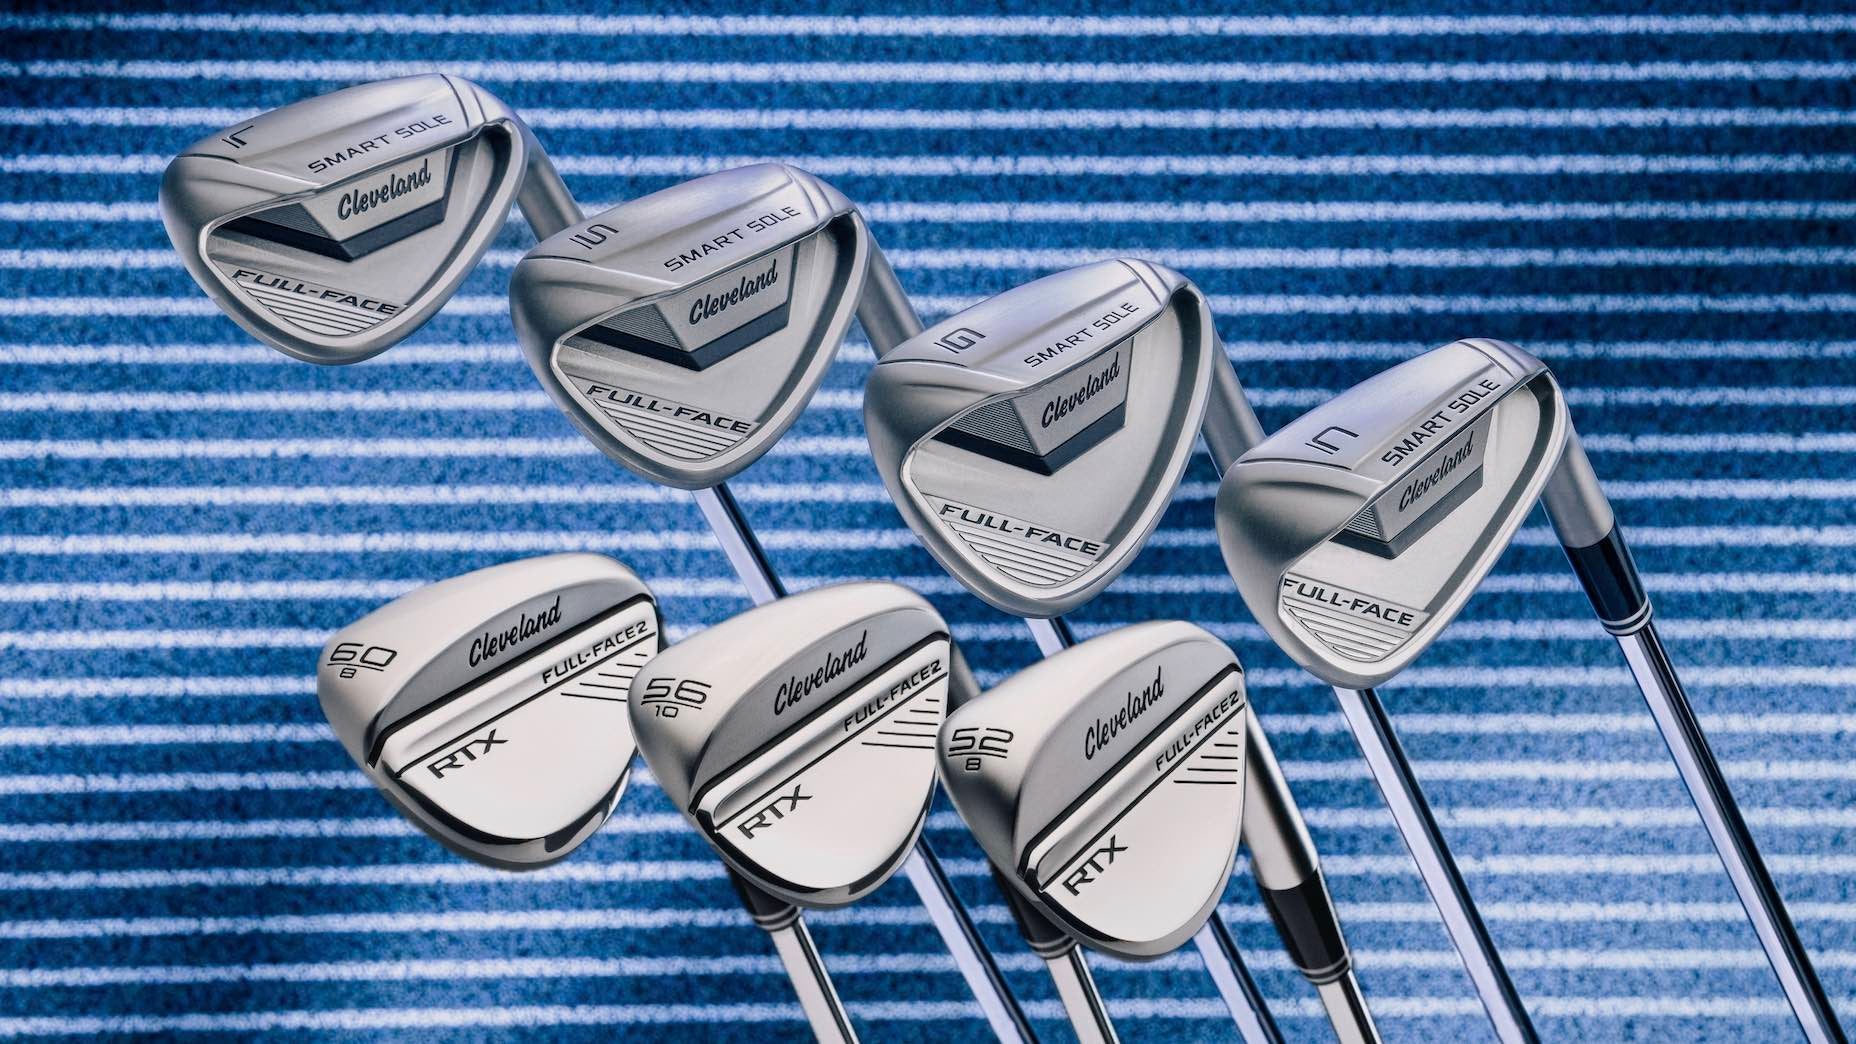 Cleveland RTX full face and smart sole wedges